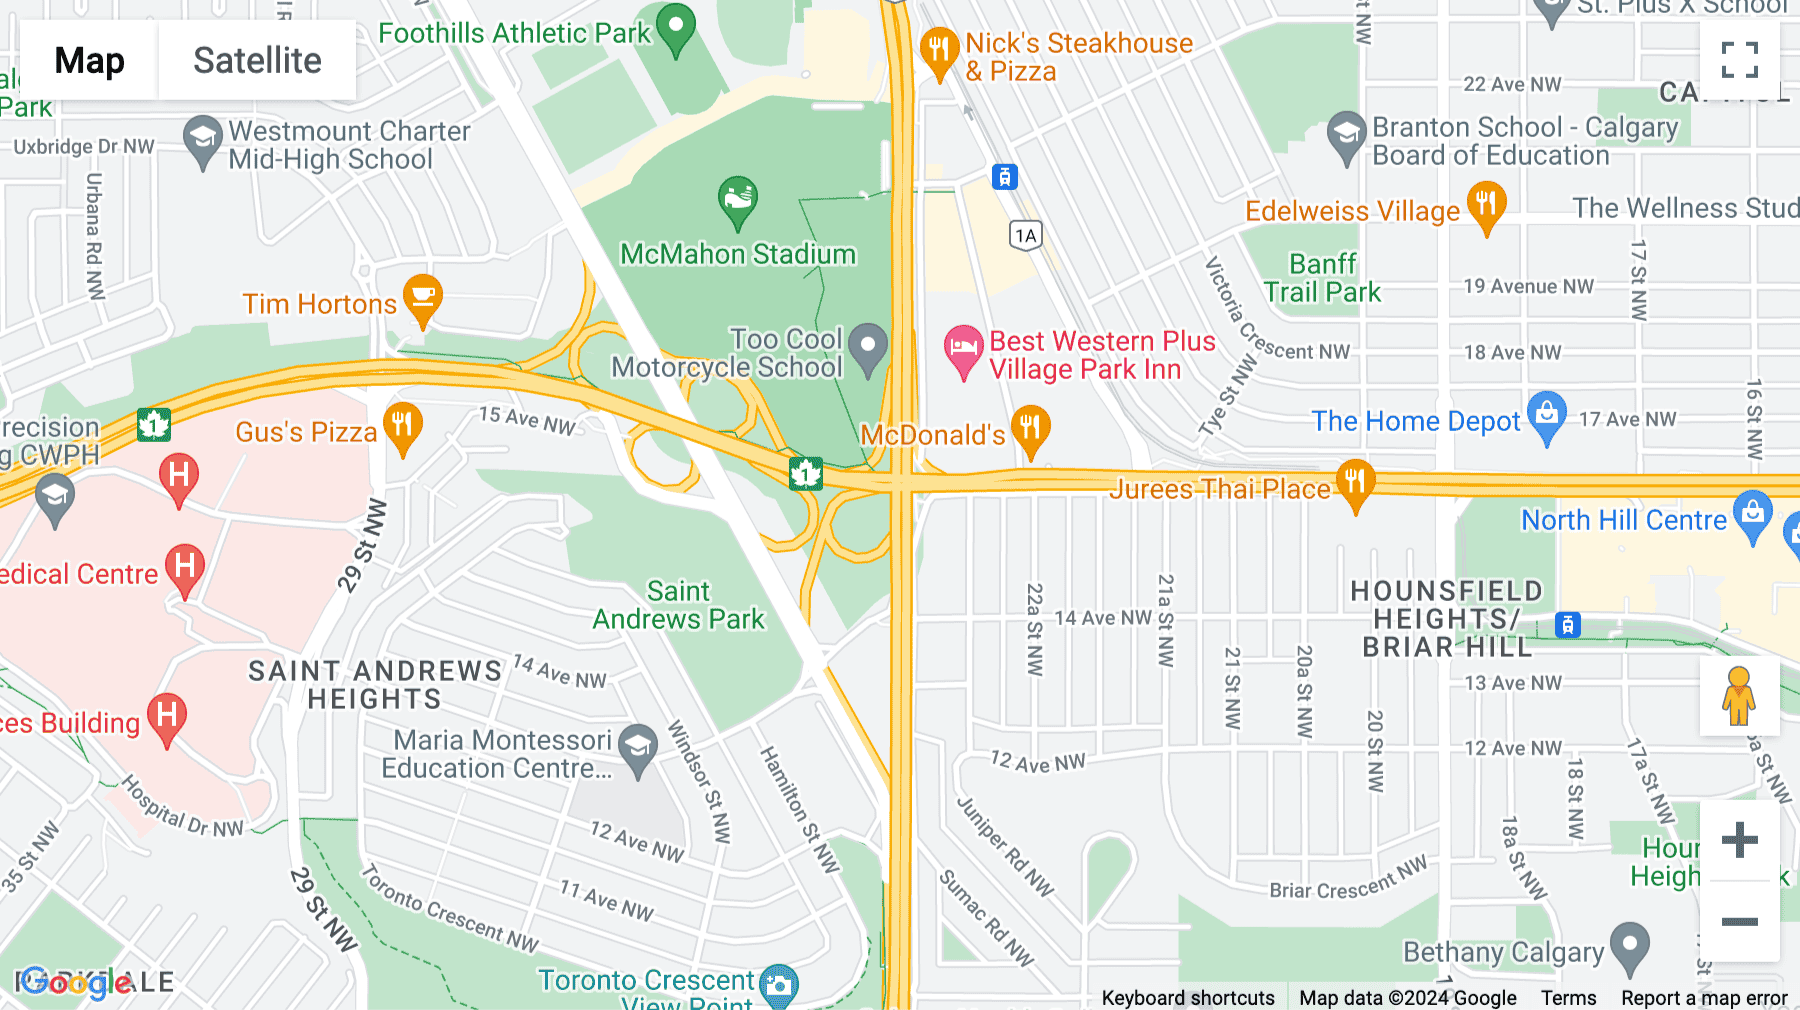 Click for interative map of Suite 700, One Executive Place, 1816 Crowchild Trail NW, Calgary, Calgary